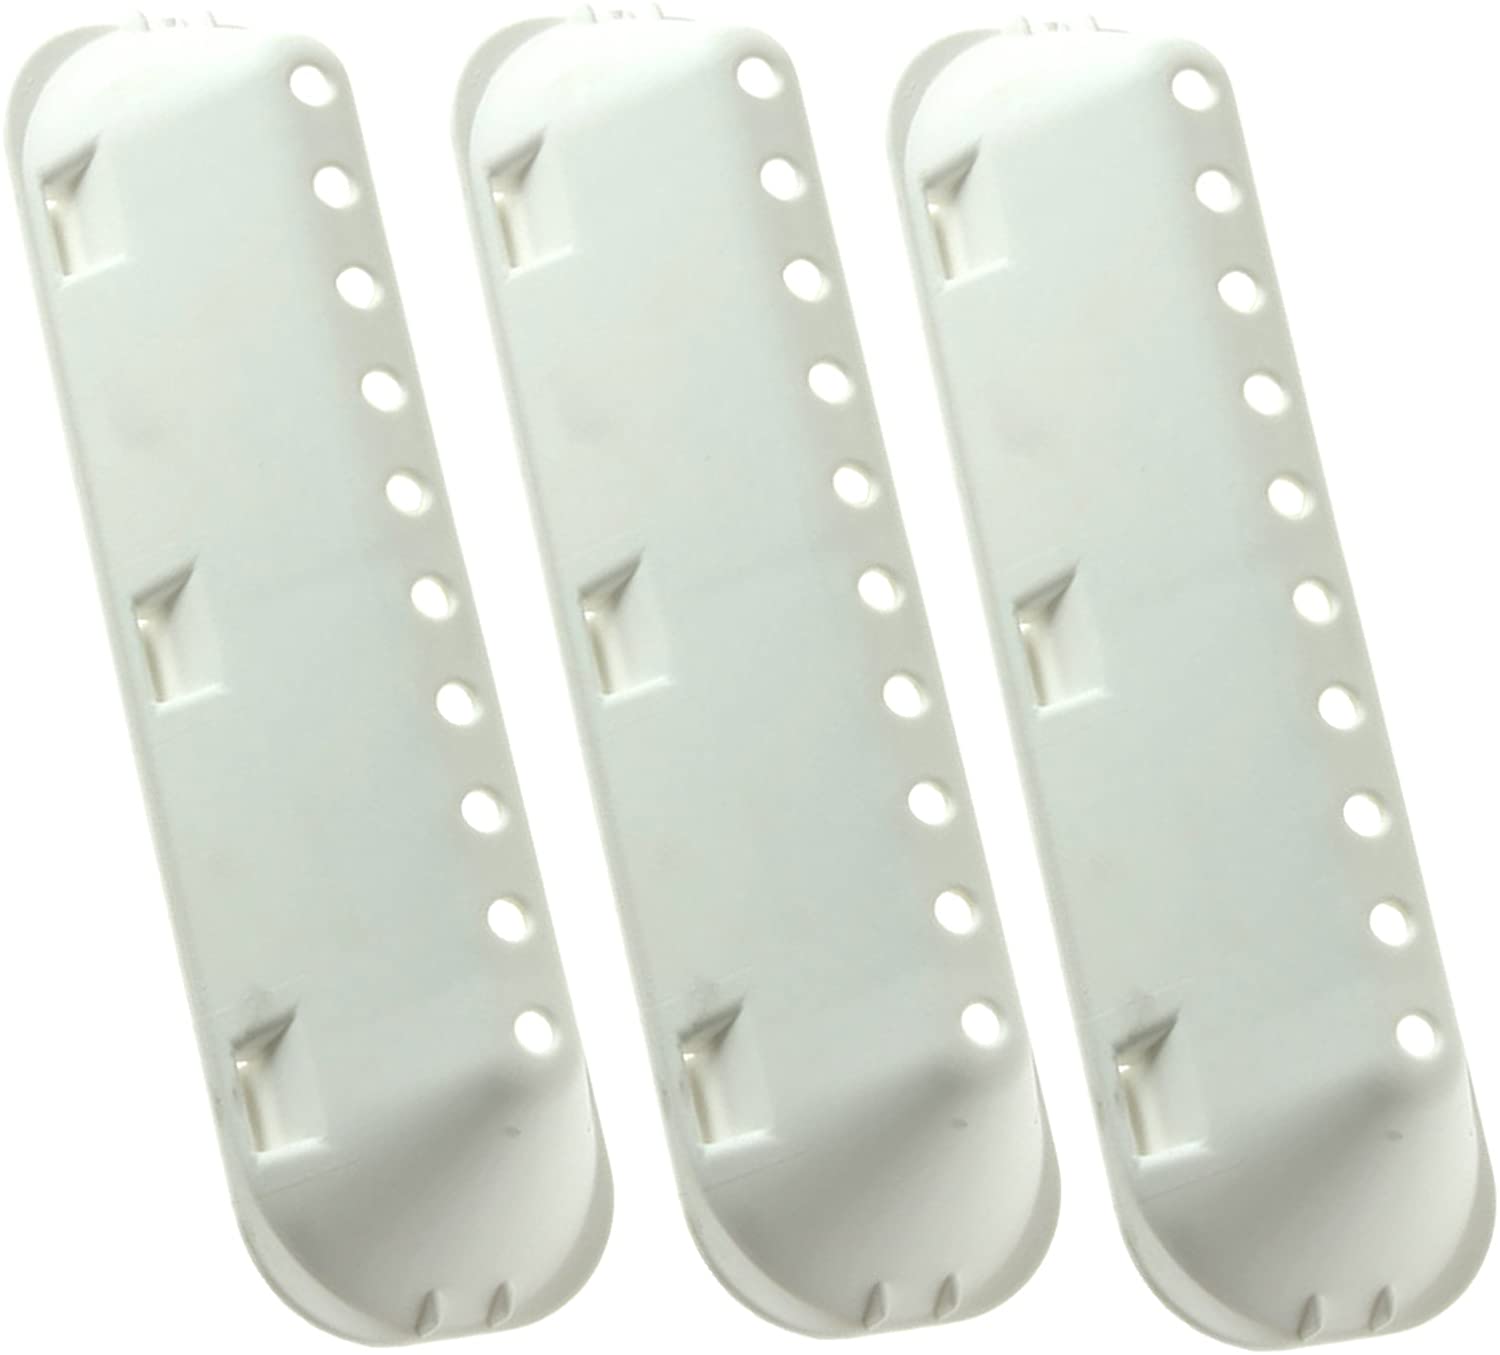 Indesit Washing Machine 10 Hole Drum Paddle Lifter Arms (Pack of 3, 183mm x 53mm x 38mm)